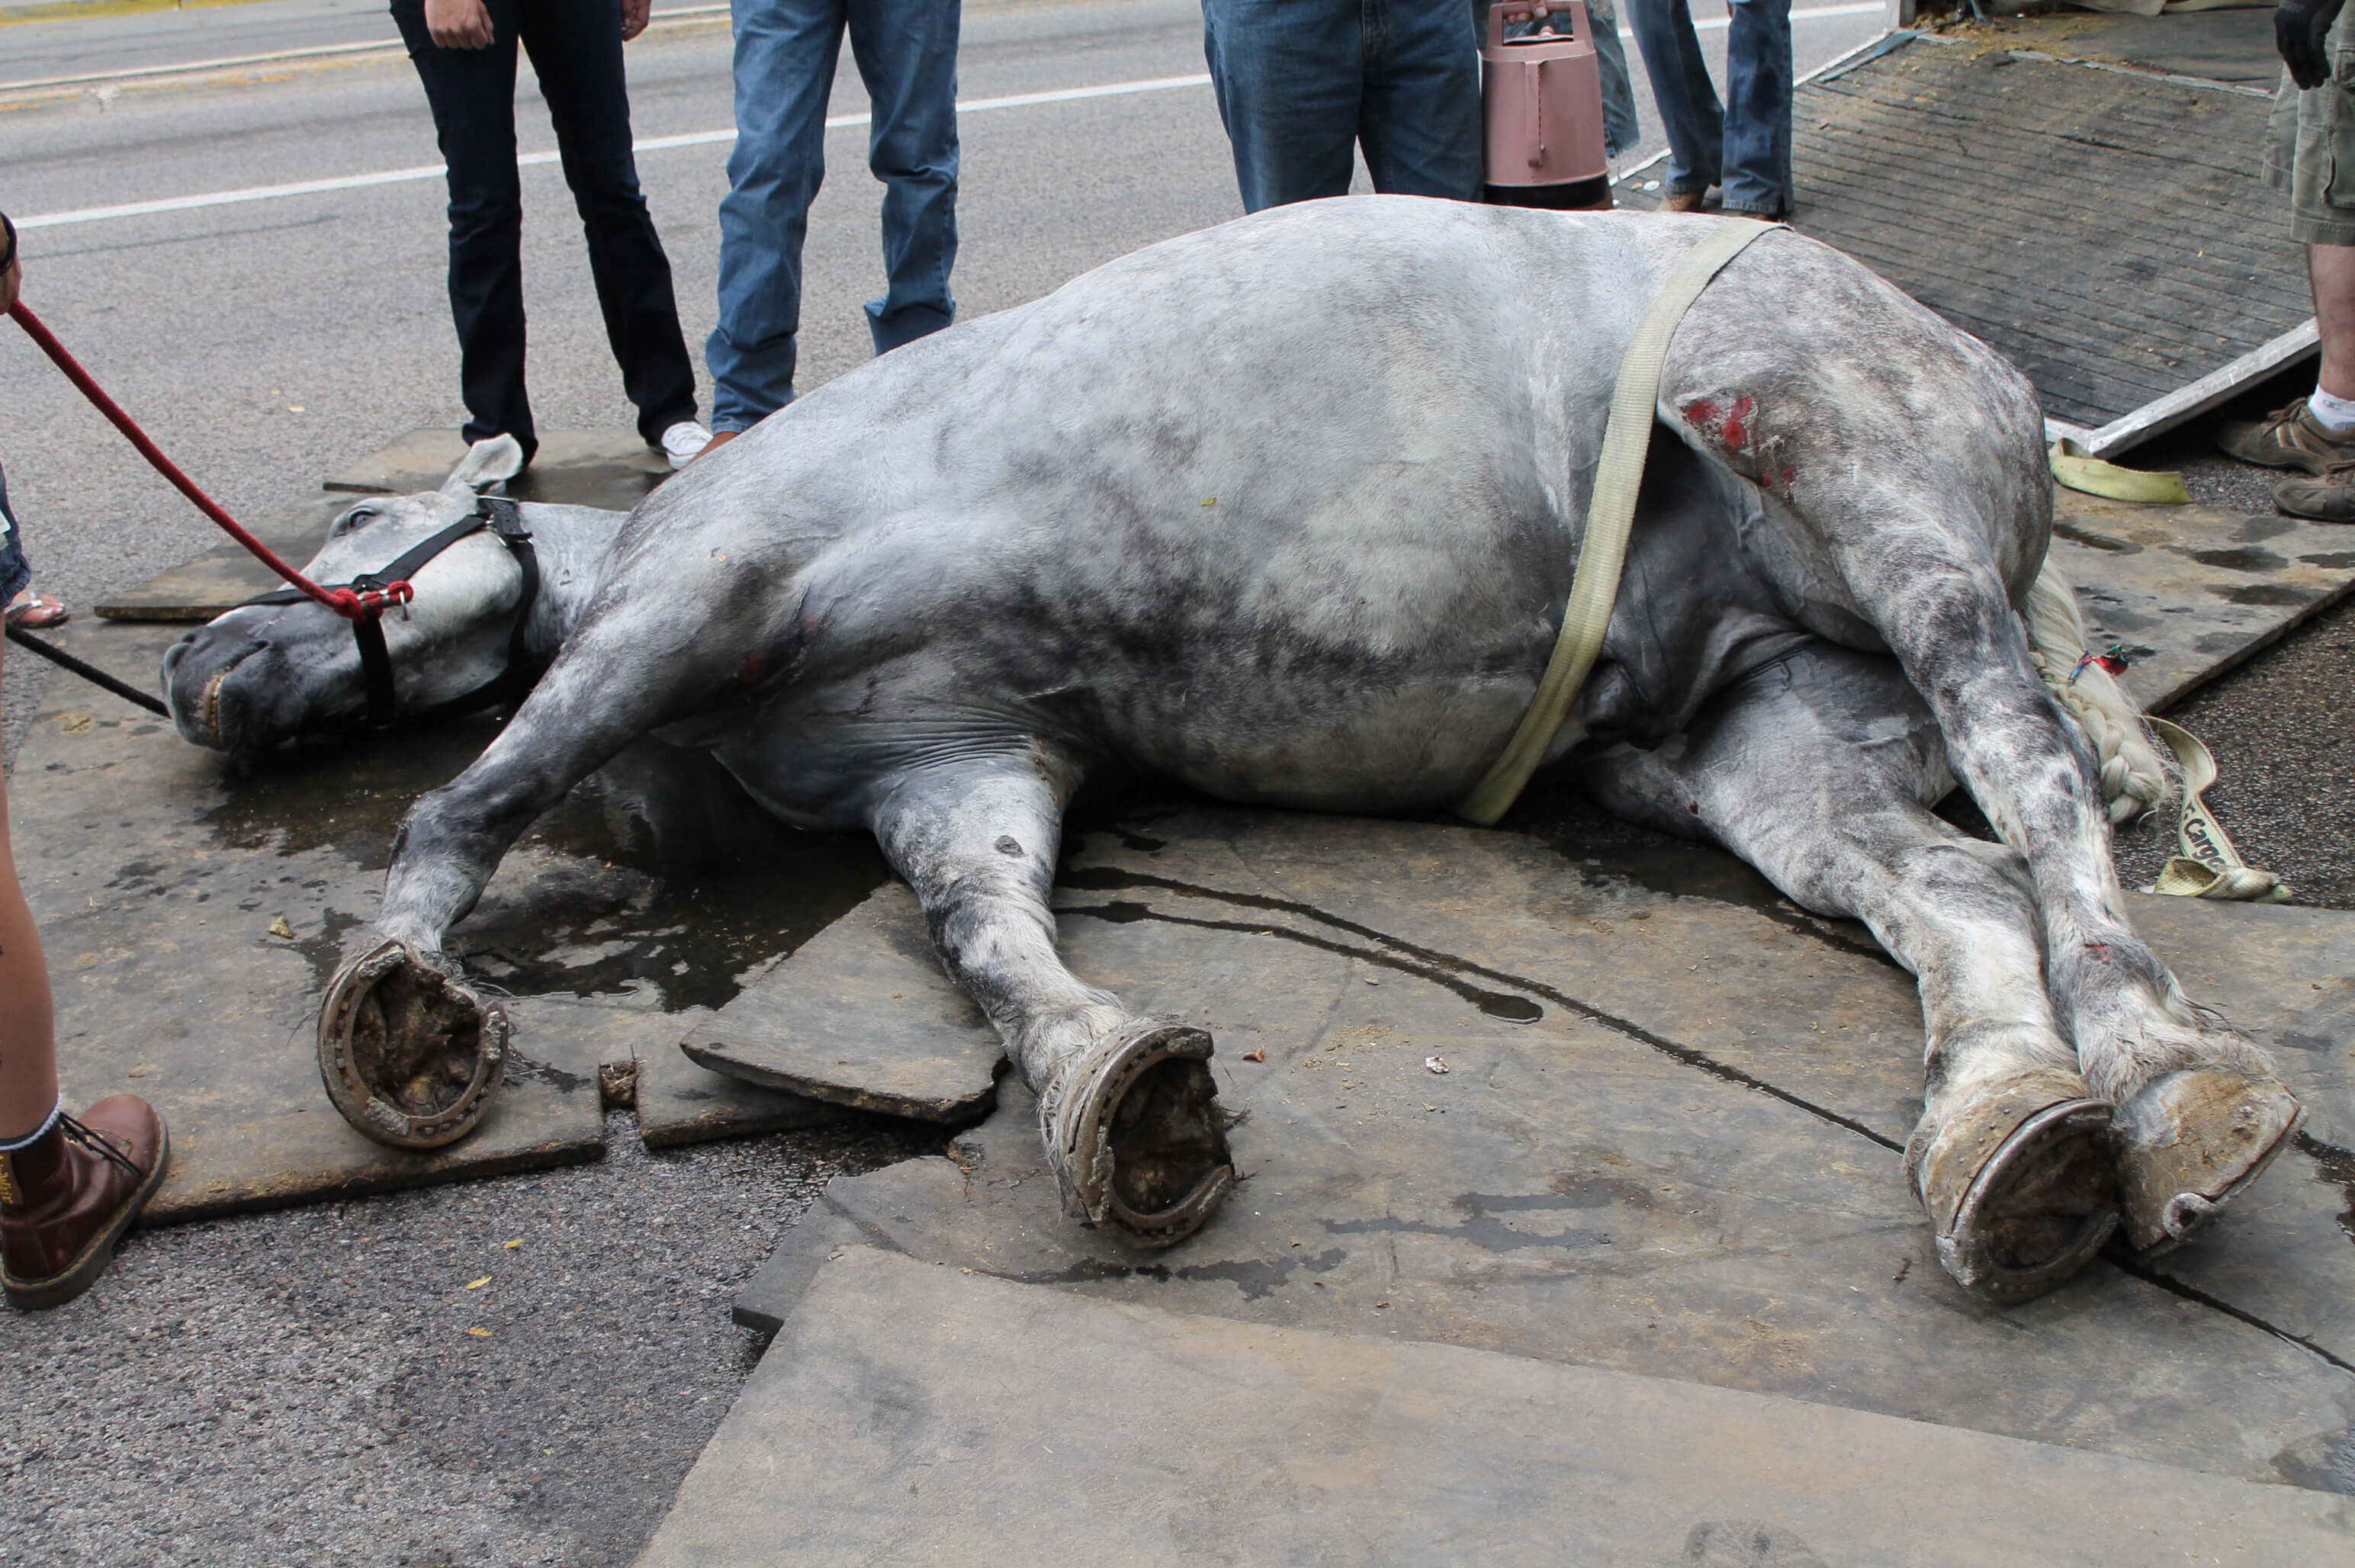 horse named Jerry who collapsed on the pavement after pulling a carriage down State Street in Salt Lake City